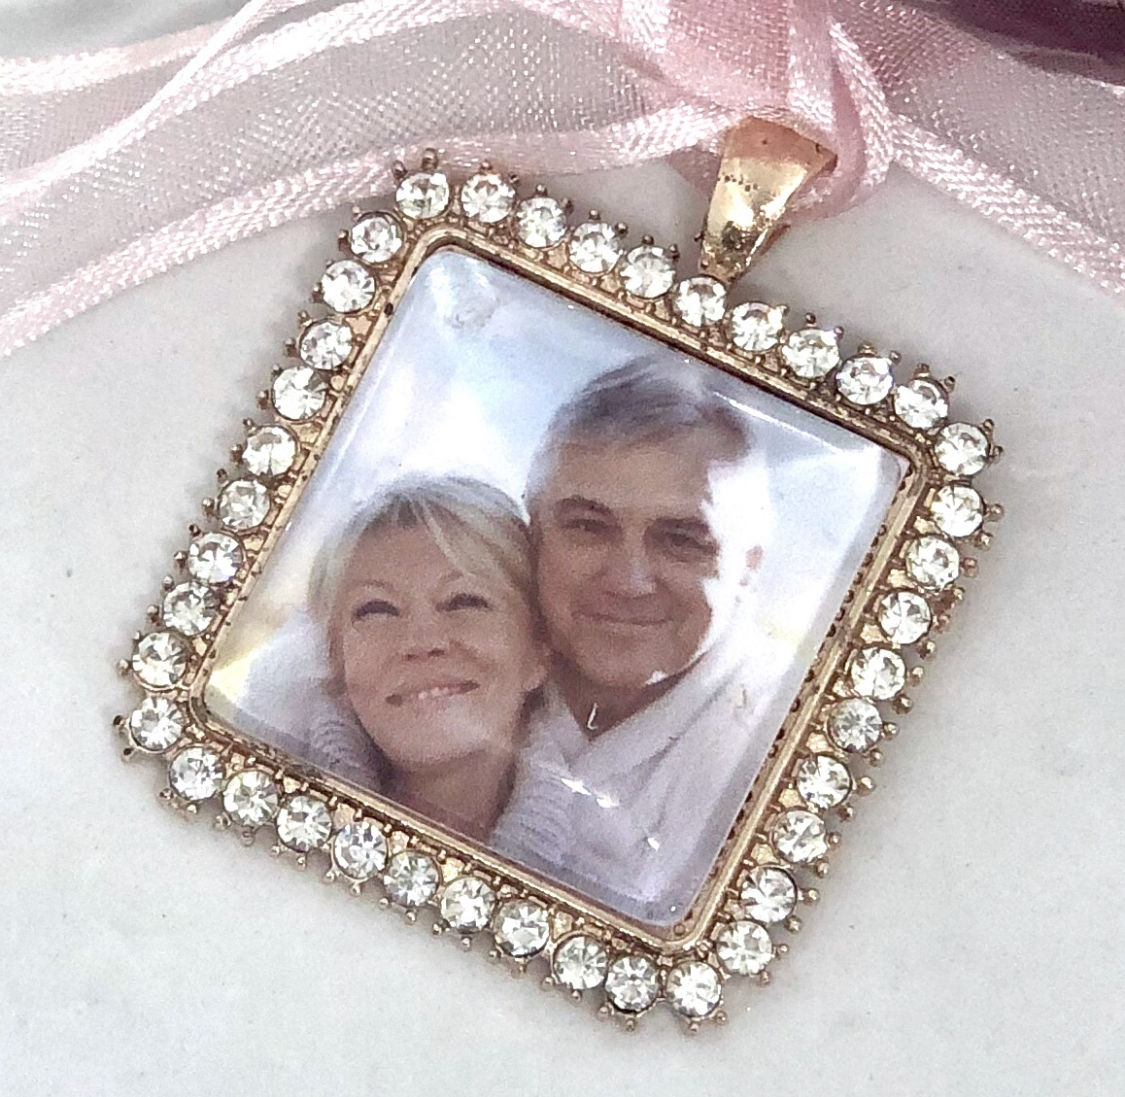 DIANA ROSE - Rose Gold Bling Bridal Memory Charm. This frame holds a picture 25mm and is edged with sparkling rhinestones.
Also comes in Silver and Gold
@bejewelled_bridal #bridalcharm #bouquetcharm #memorycharm #keepsake #bridalkeepsakes #bridalpictures #picturecharm